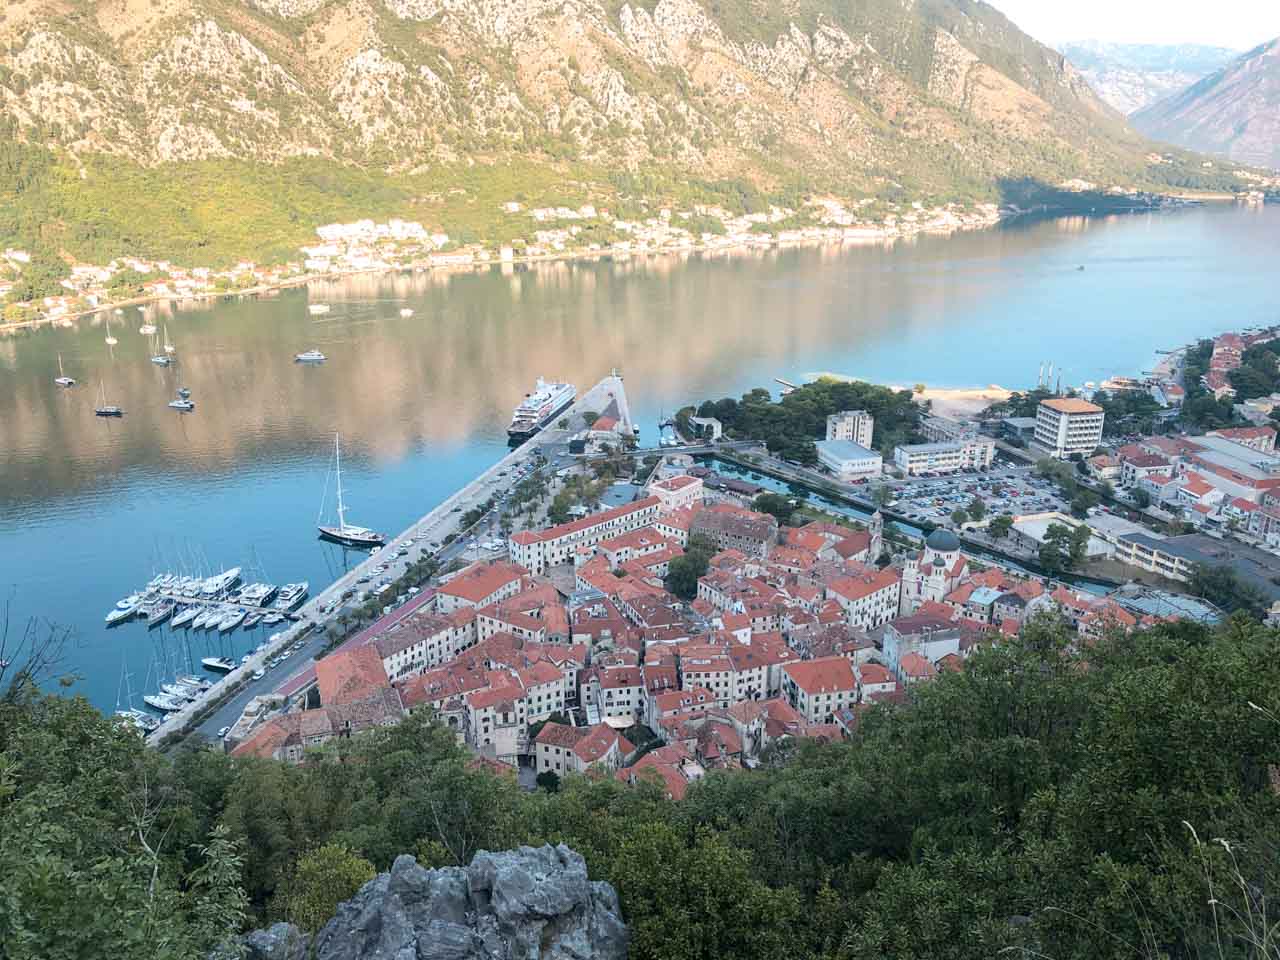 Port in Kotor seen from the top of the Kotor City Walls